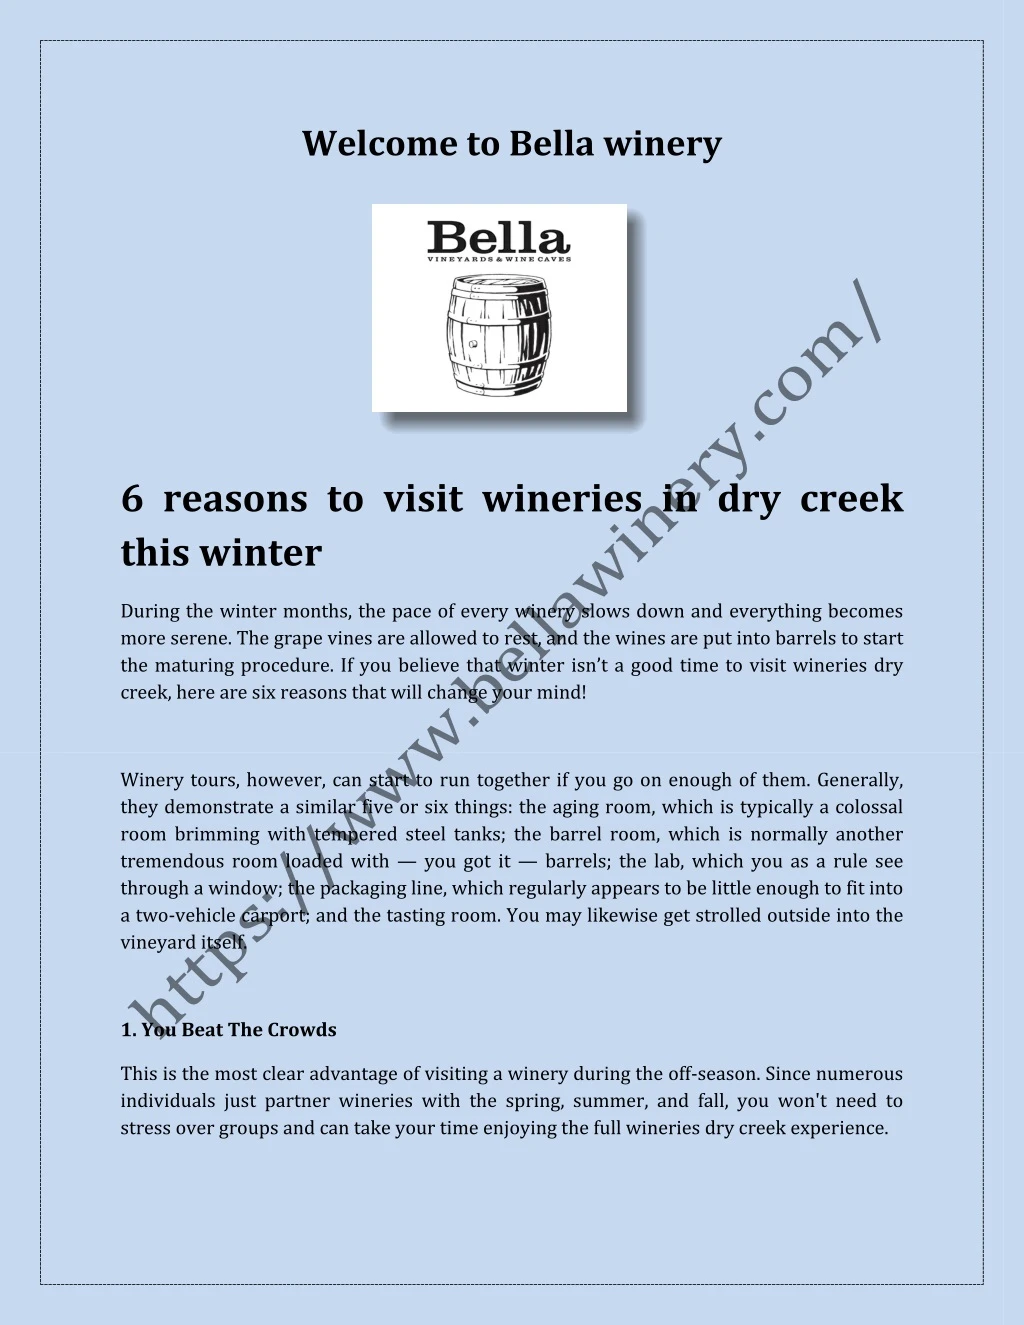 welcome to bella winery